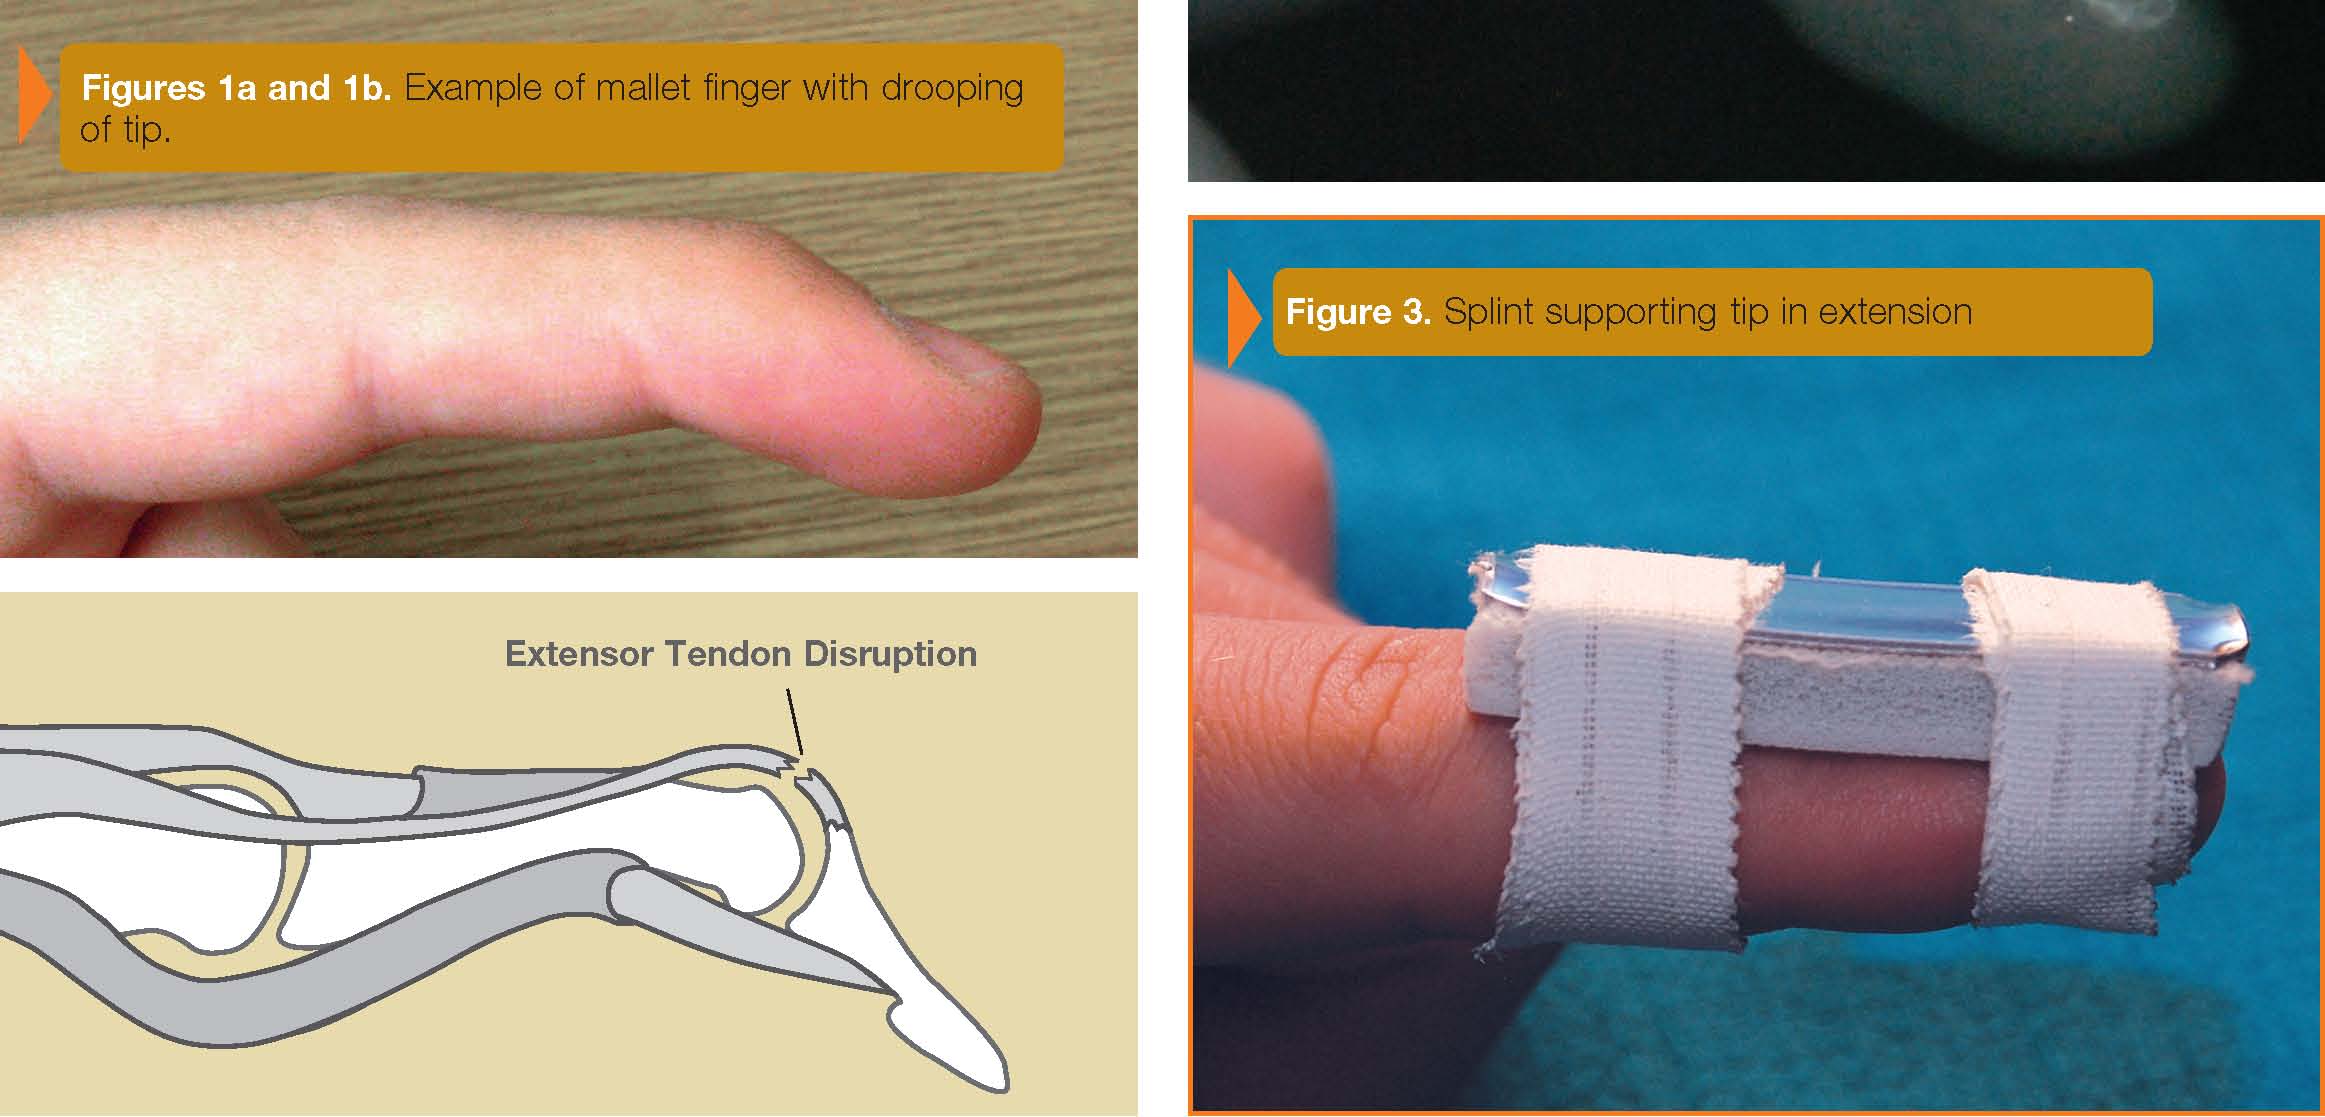 What happens if mallet finger goes untreated?